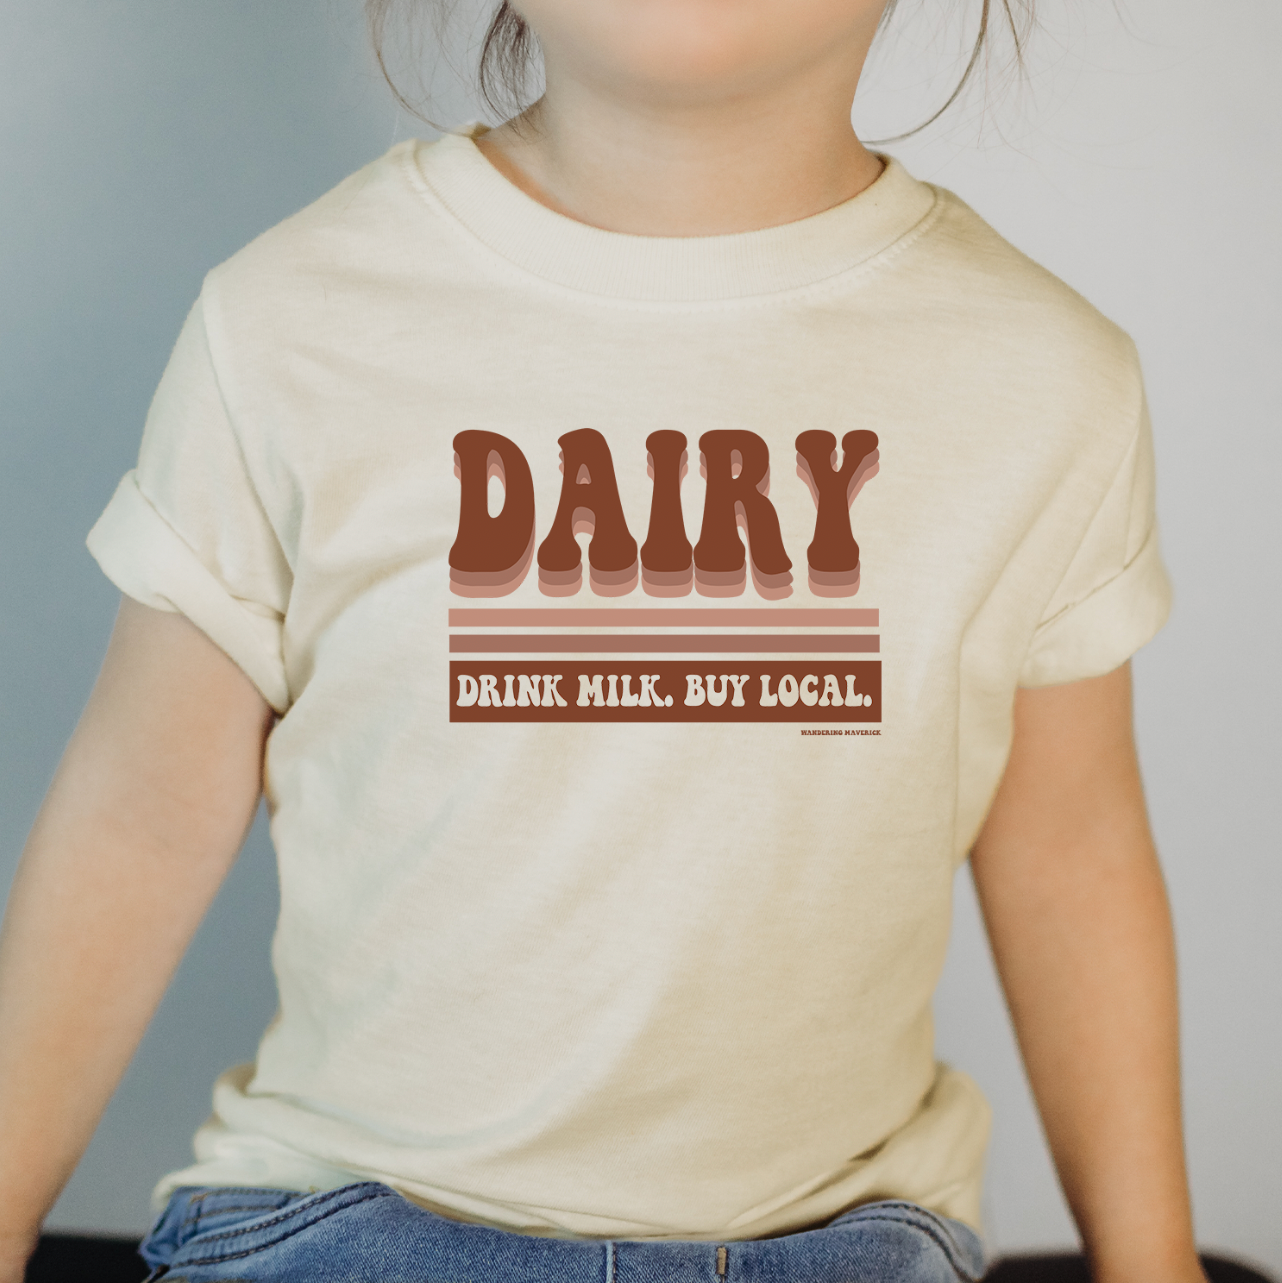 Retro Dairy One Piece/T-Shirt (Newborn - Youth XL) - Multiple Colors!